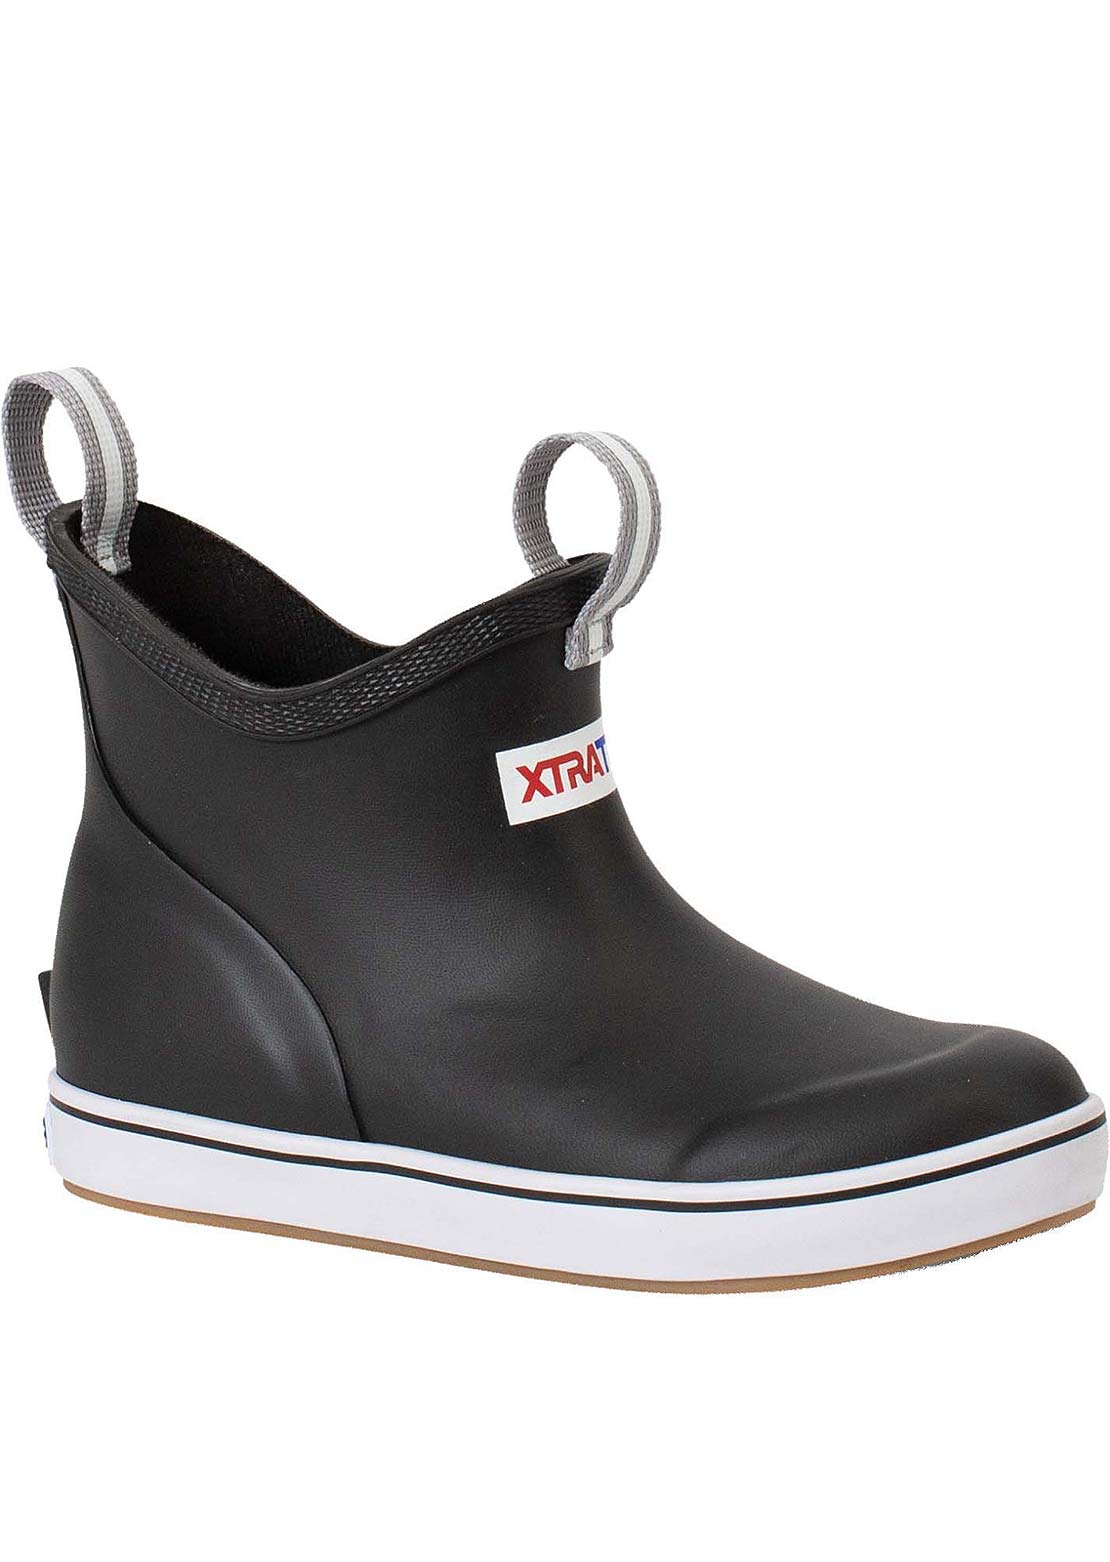 Xtratuf Toddler Ankle Deck Boots Black